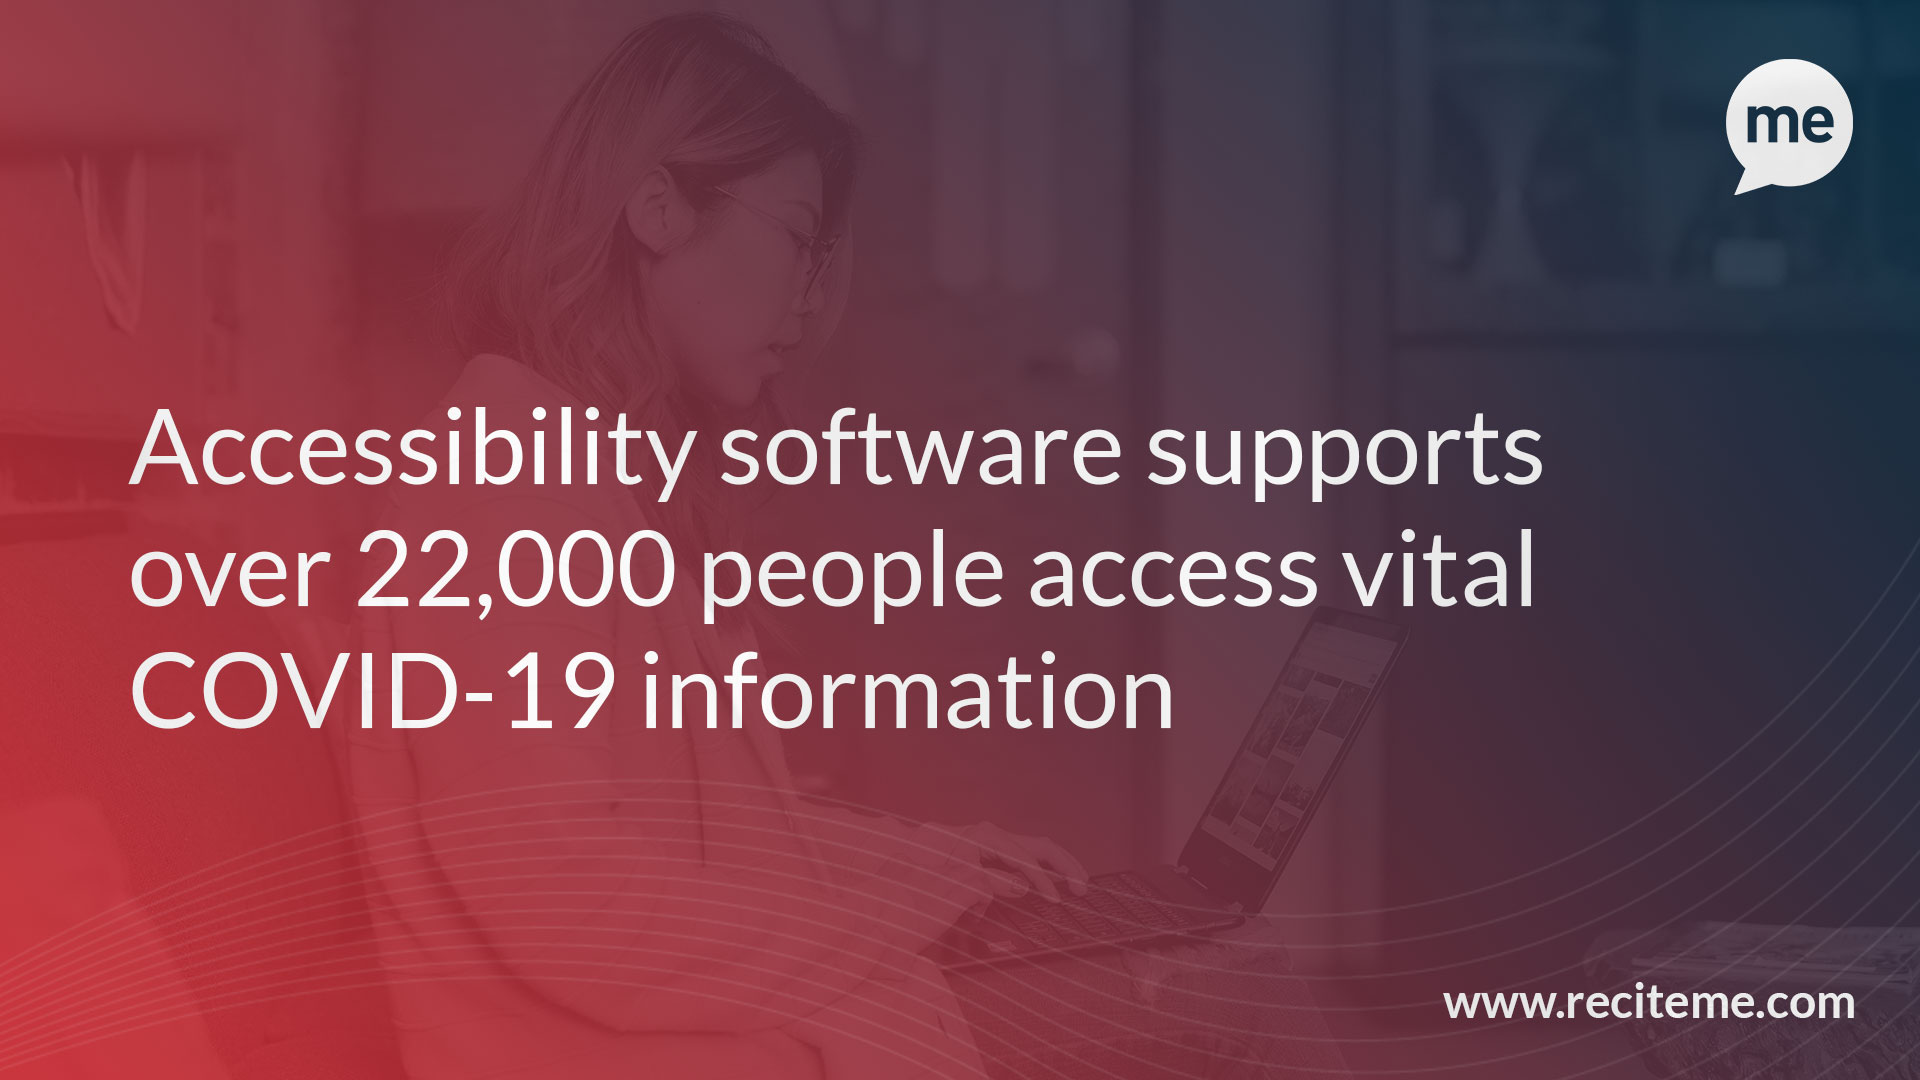 Accessibility software supports over 22,000 people access vital COVID-19 information